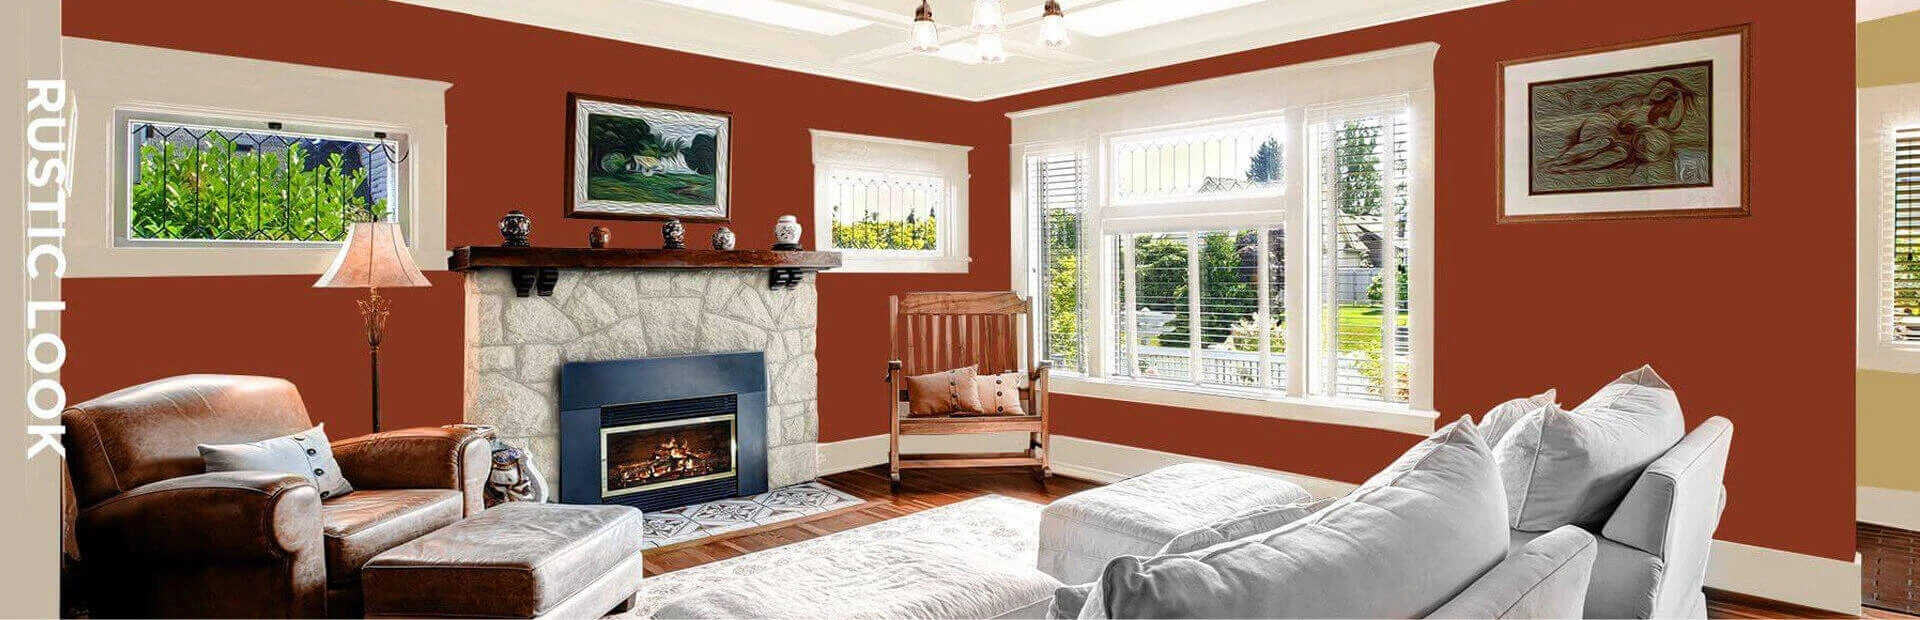 Rustic style living room in tan, red, and brown, featuring furniture and paintings on walls.